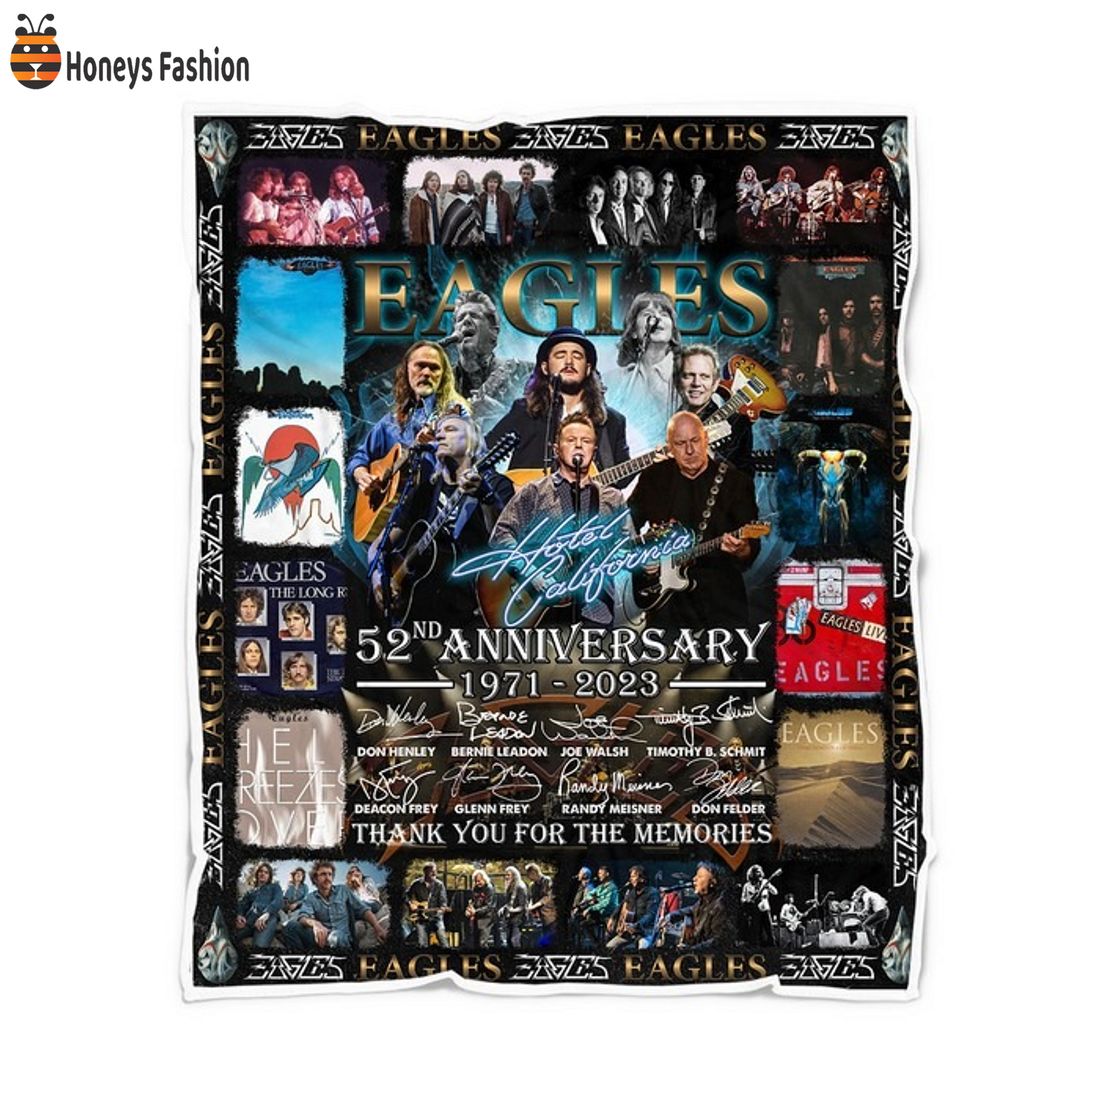 Eagles Hotel California 52nd anniversary thank you for the memories fleece blanket